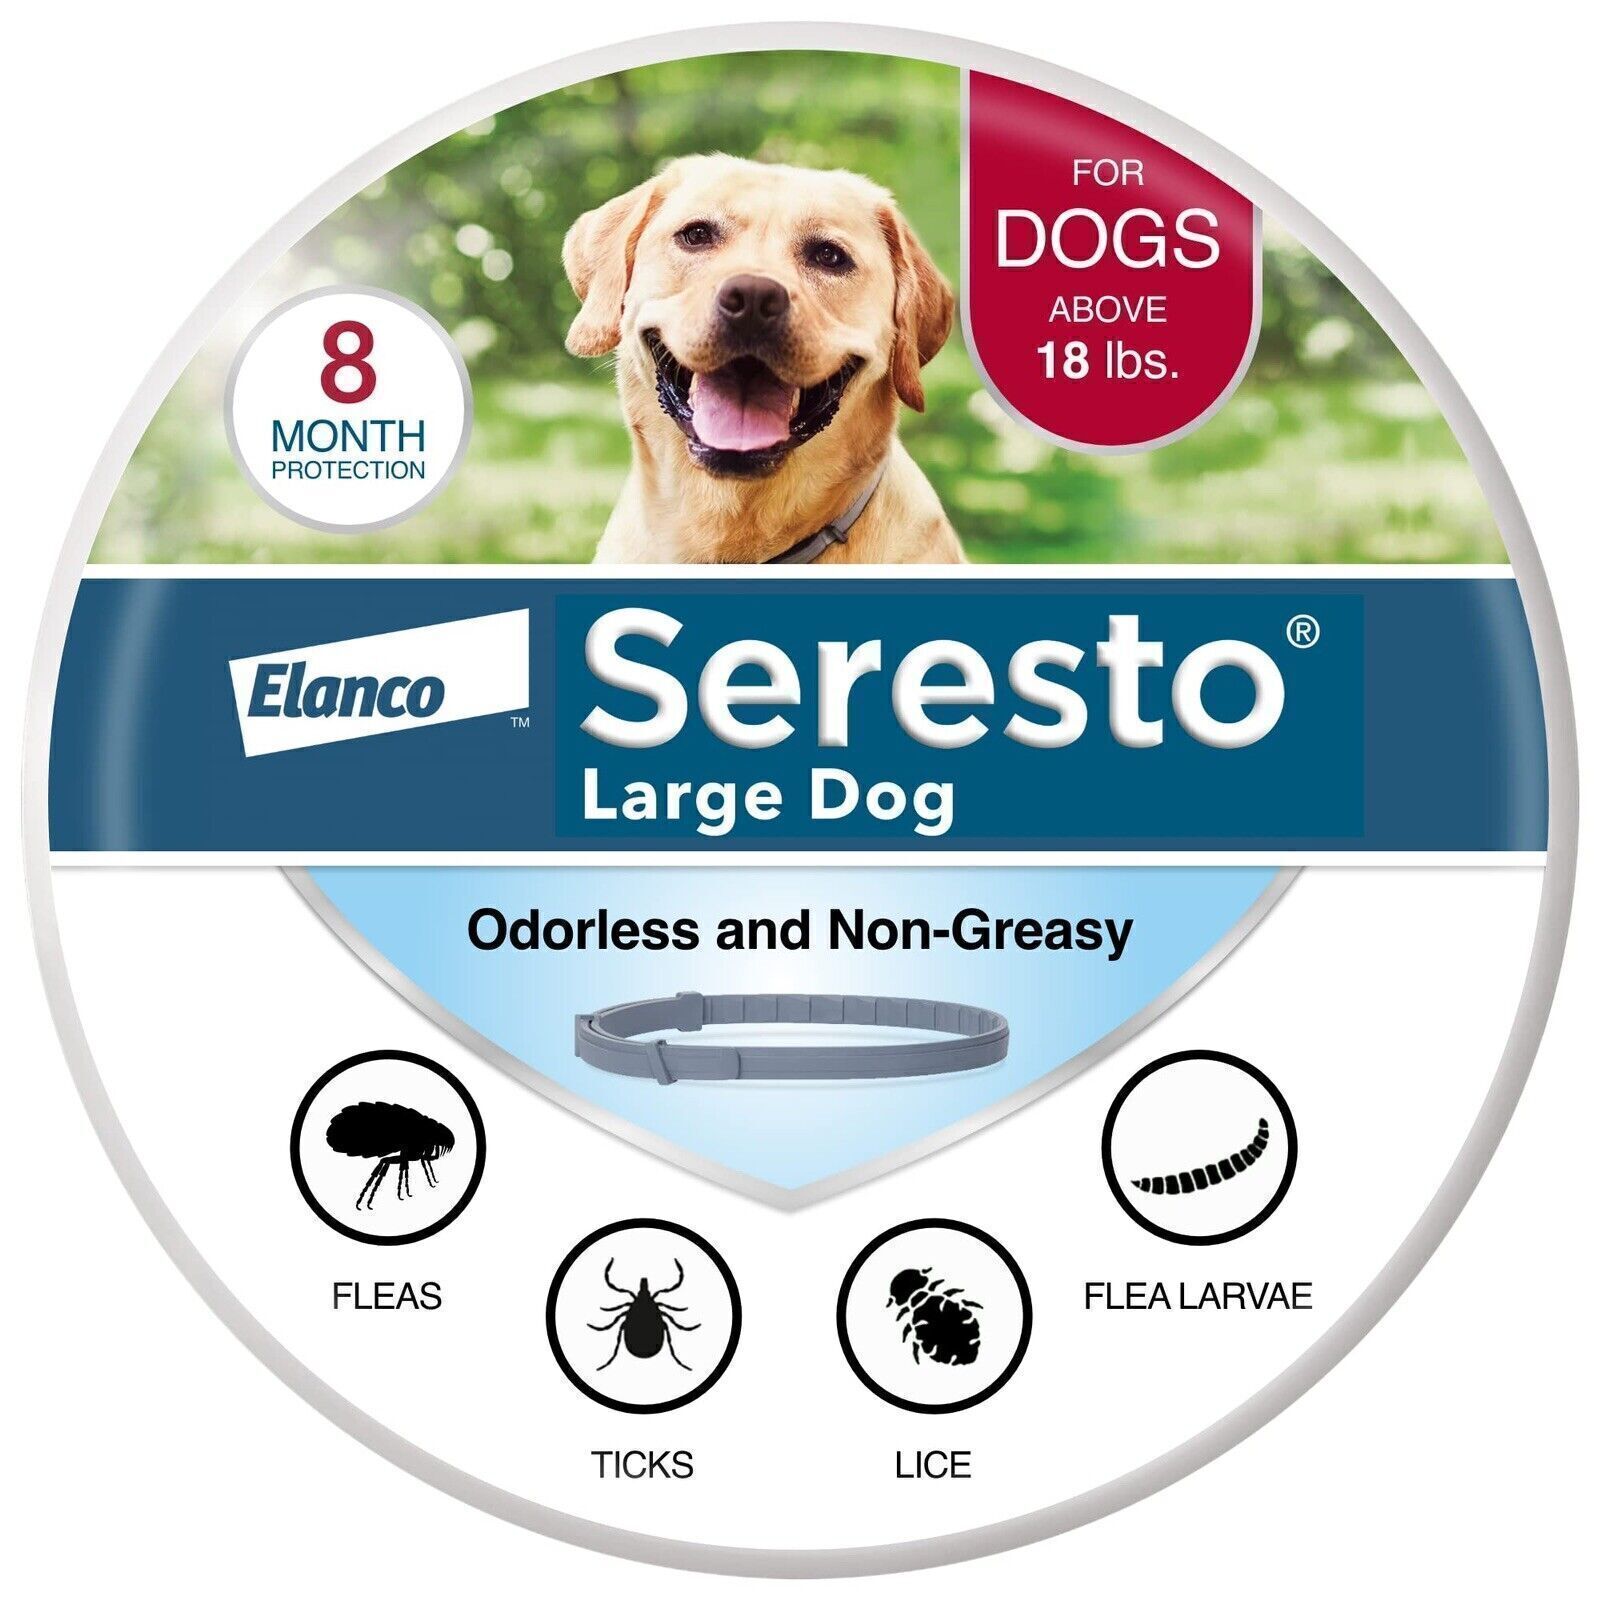 Seresto Flea and Tick Collar 8 Months Protection for Large Dogs - 18lbs！USA New1